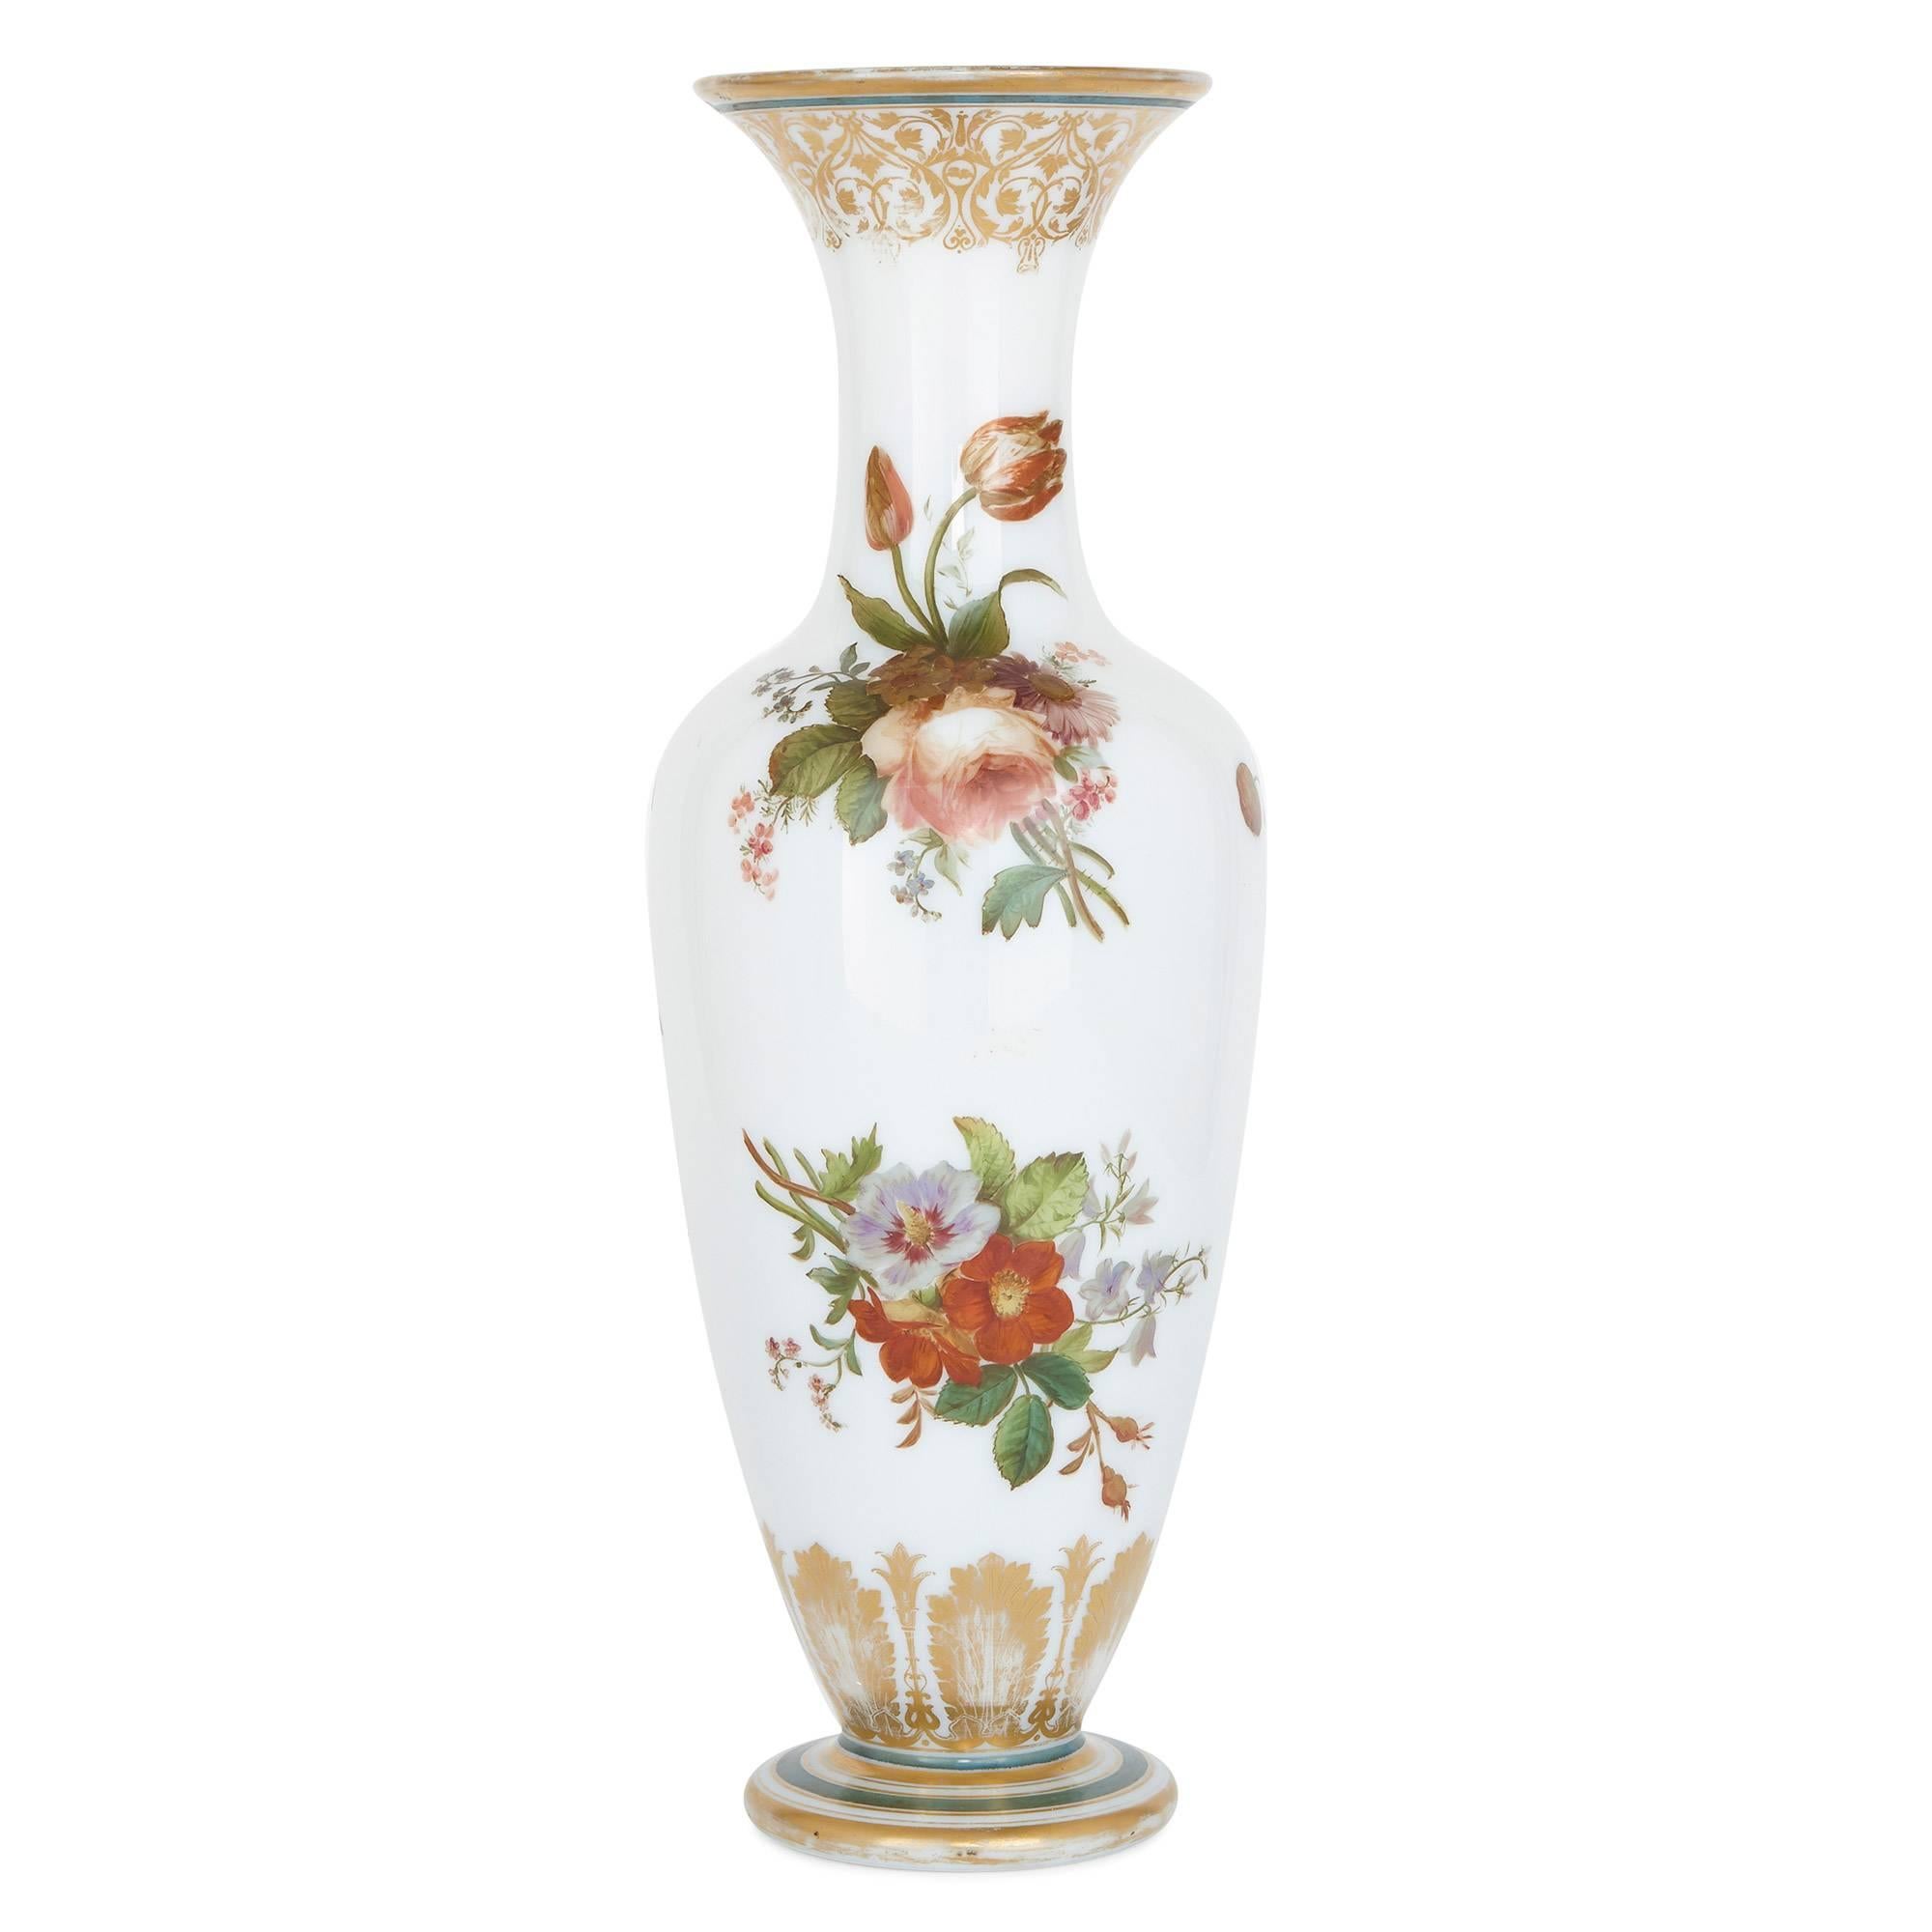 Prestigious French glassmakers Baccarat - responsible for some of the most beautiful glassware of the 19th century - were the manufacturers behind this stunning enamel-painted opaline glass vase. More specifically, it is likely that the enamelist